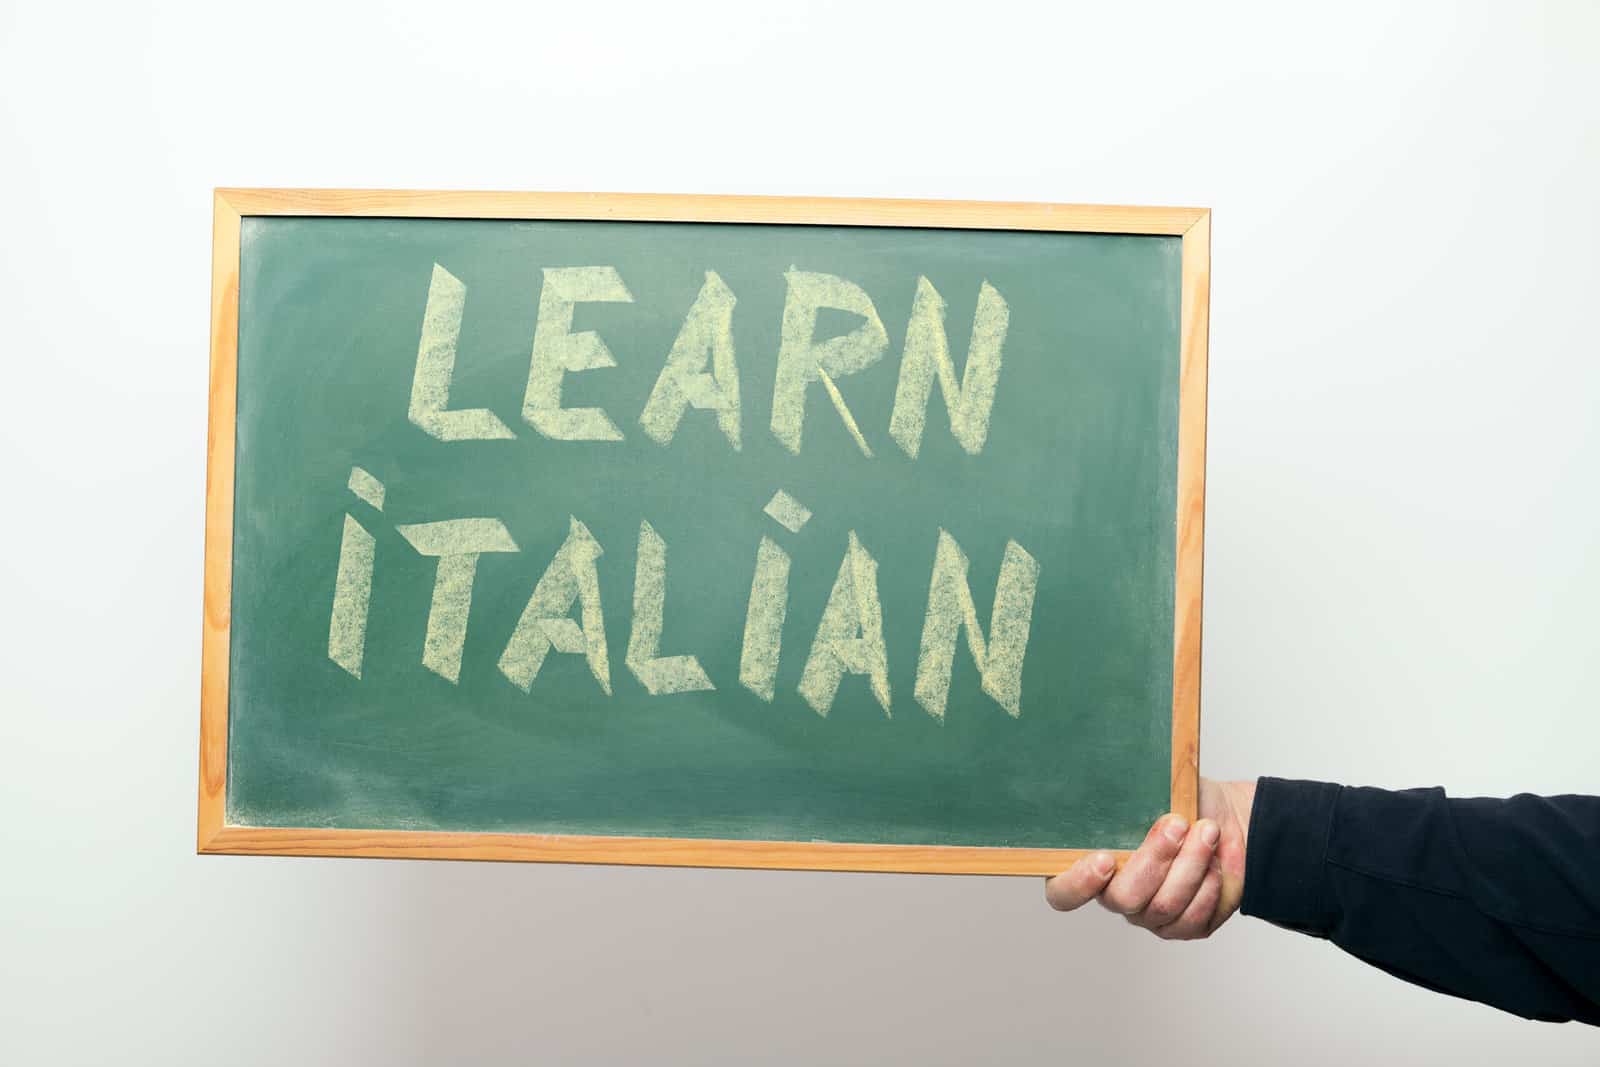 Italian Numbers; How to Accurately Count From Zero to 1 Million in Italian